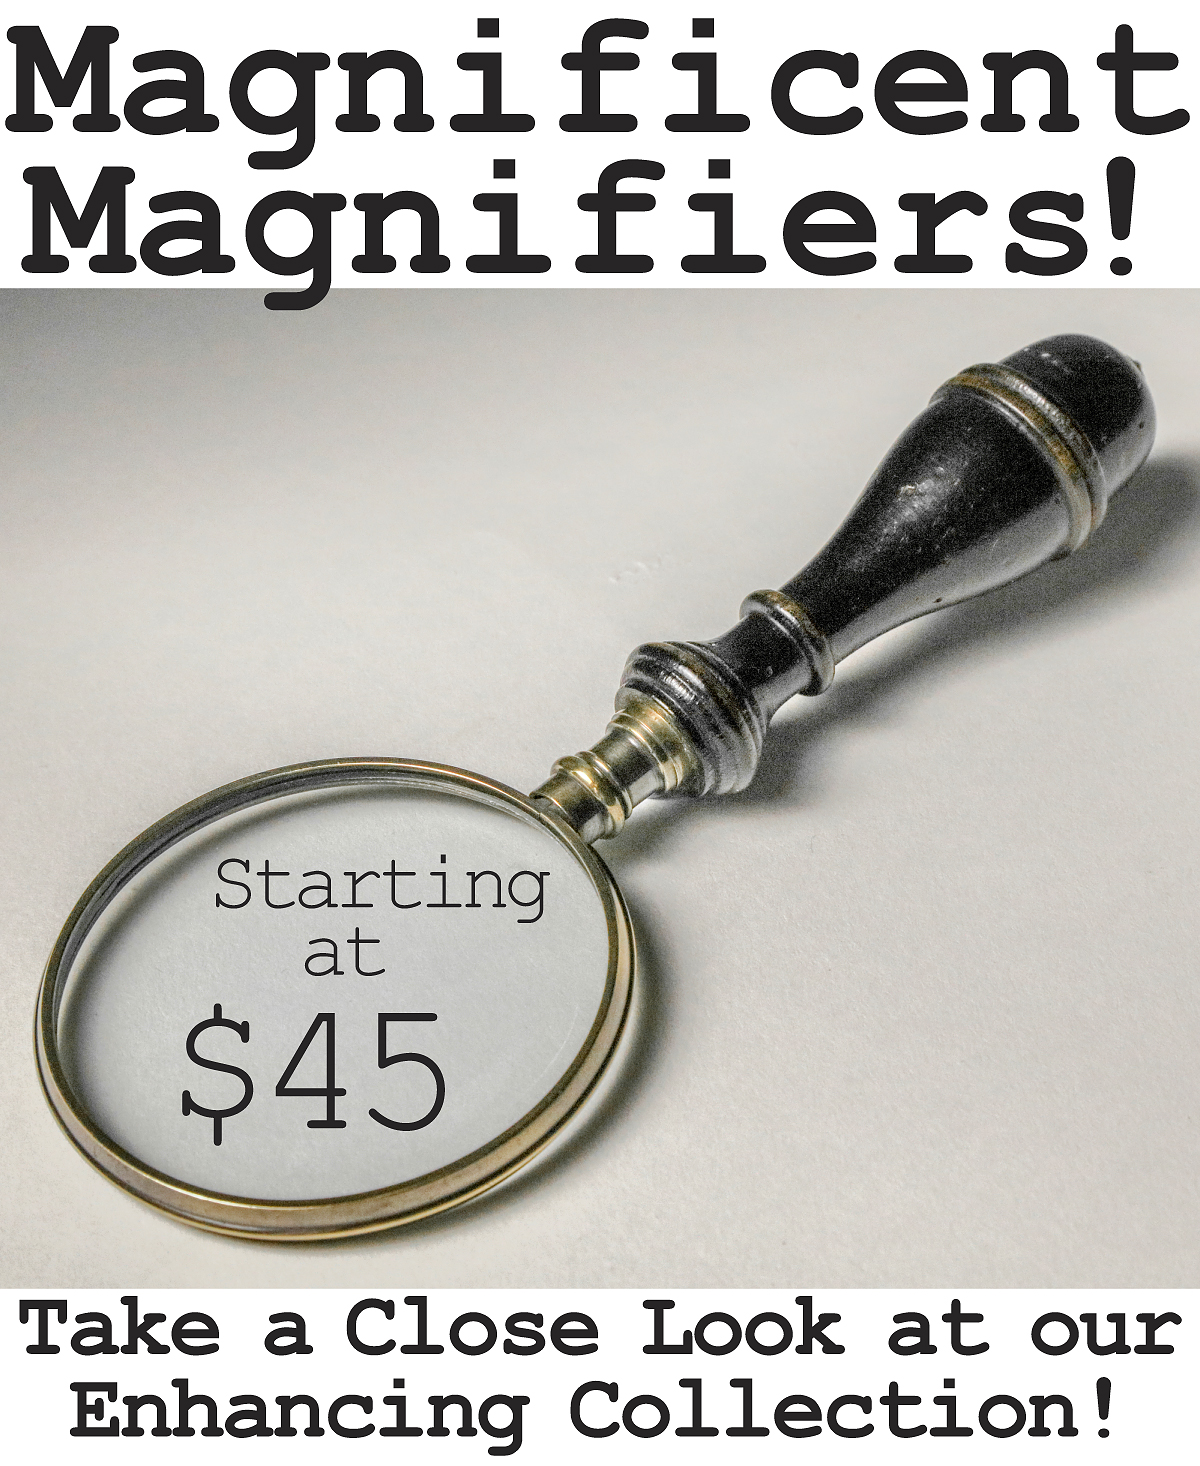 Magnificent Magnifiers